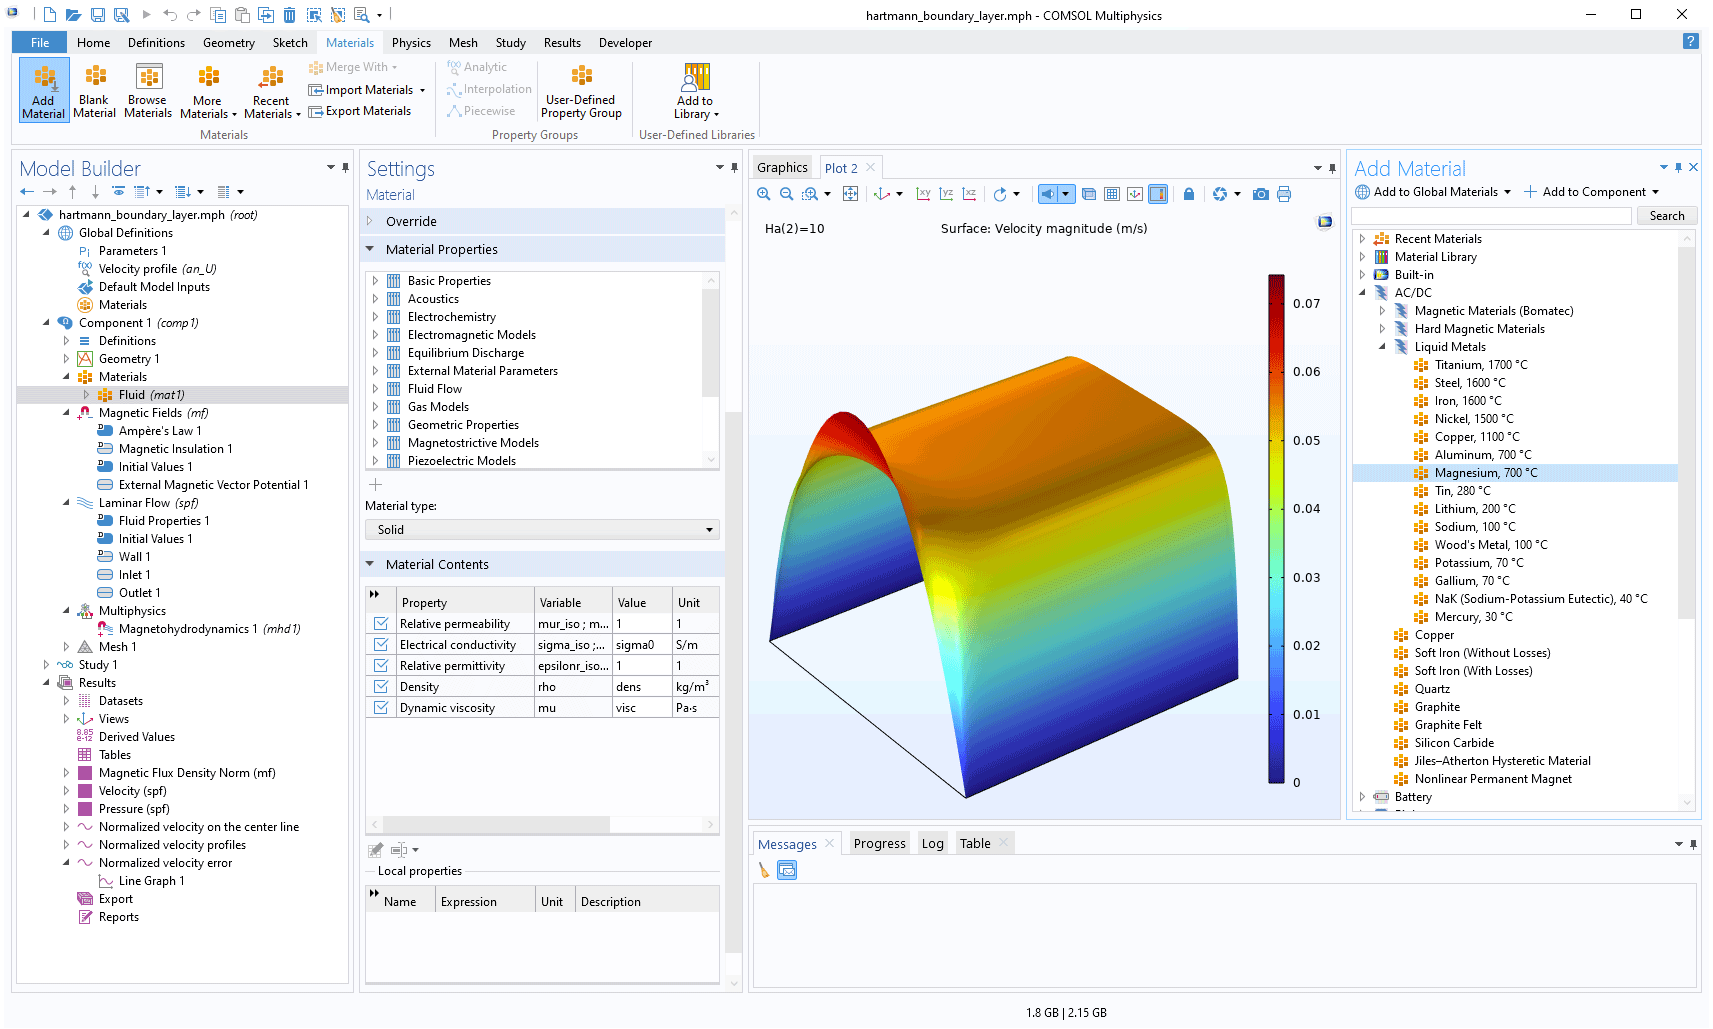 The COMSOL Multiphysics UI showing the Model Builder with a Material node highlighted, the corresponding Settings window, and the velocity profile of a Hartmann model in the Graphics window.